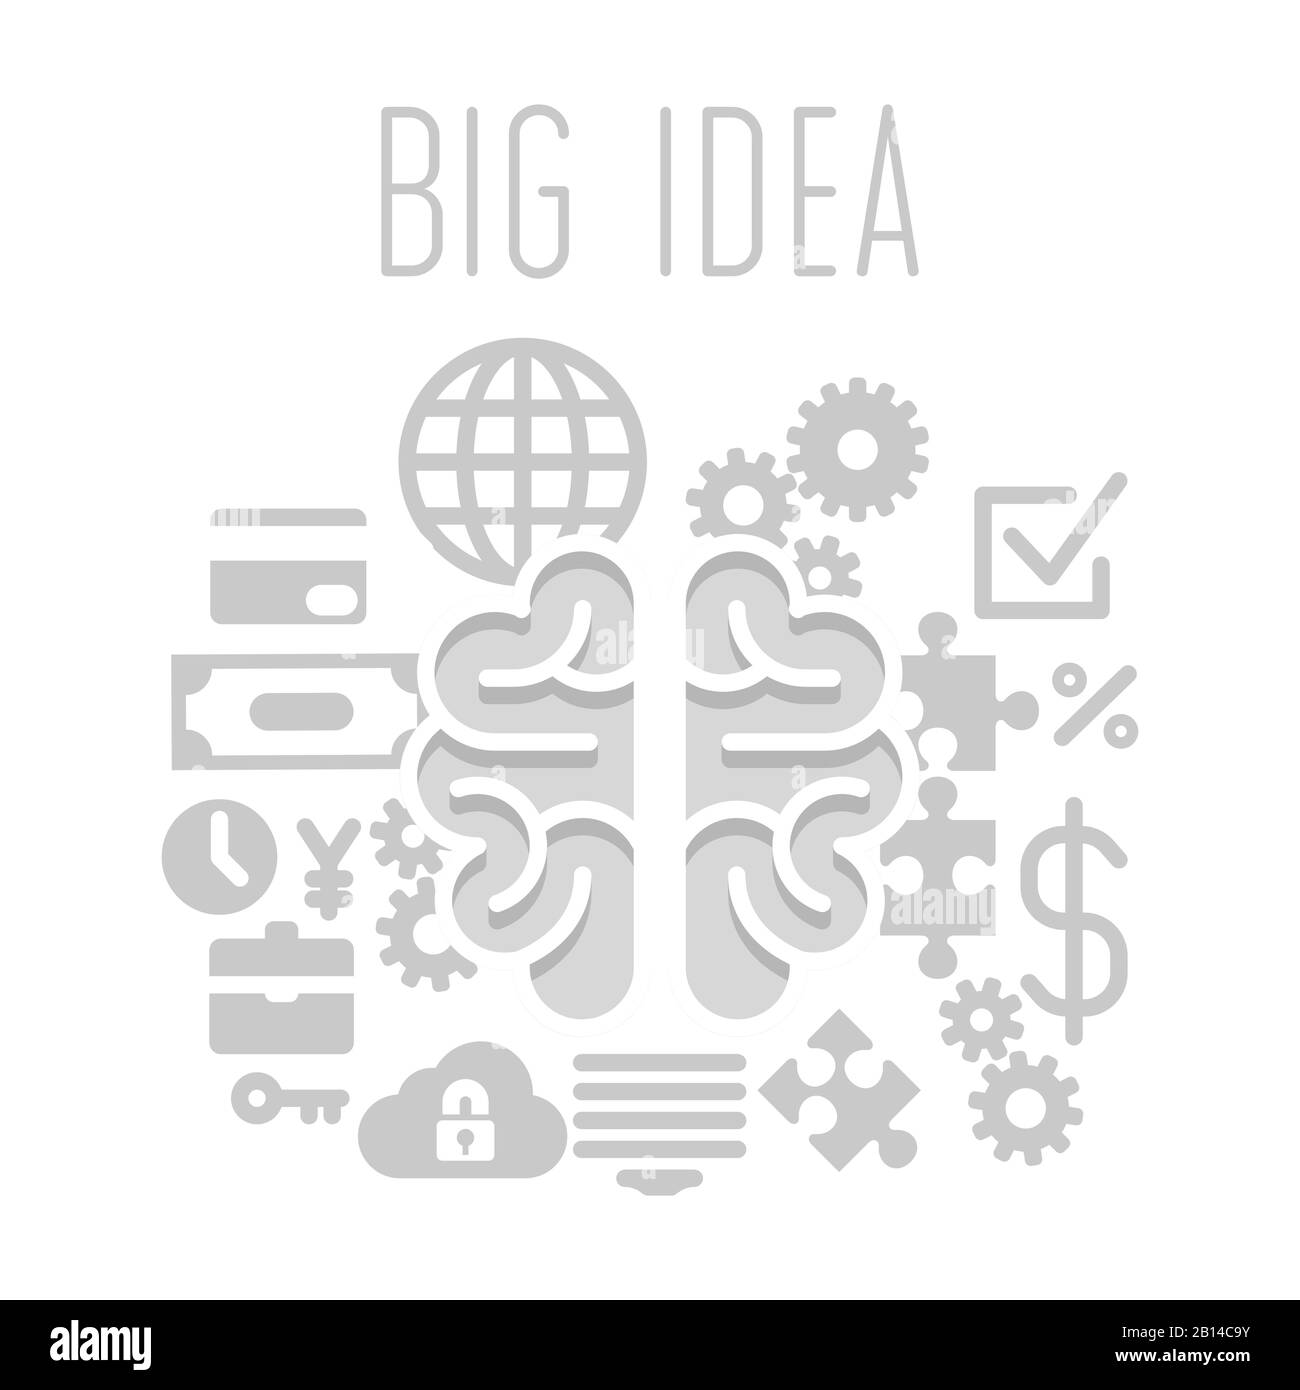 Big idea concept with brain on white background. Vector illustration Stock Vector